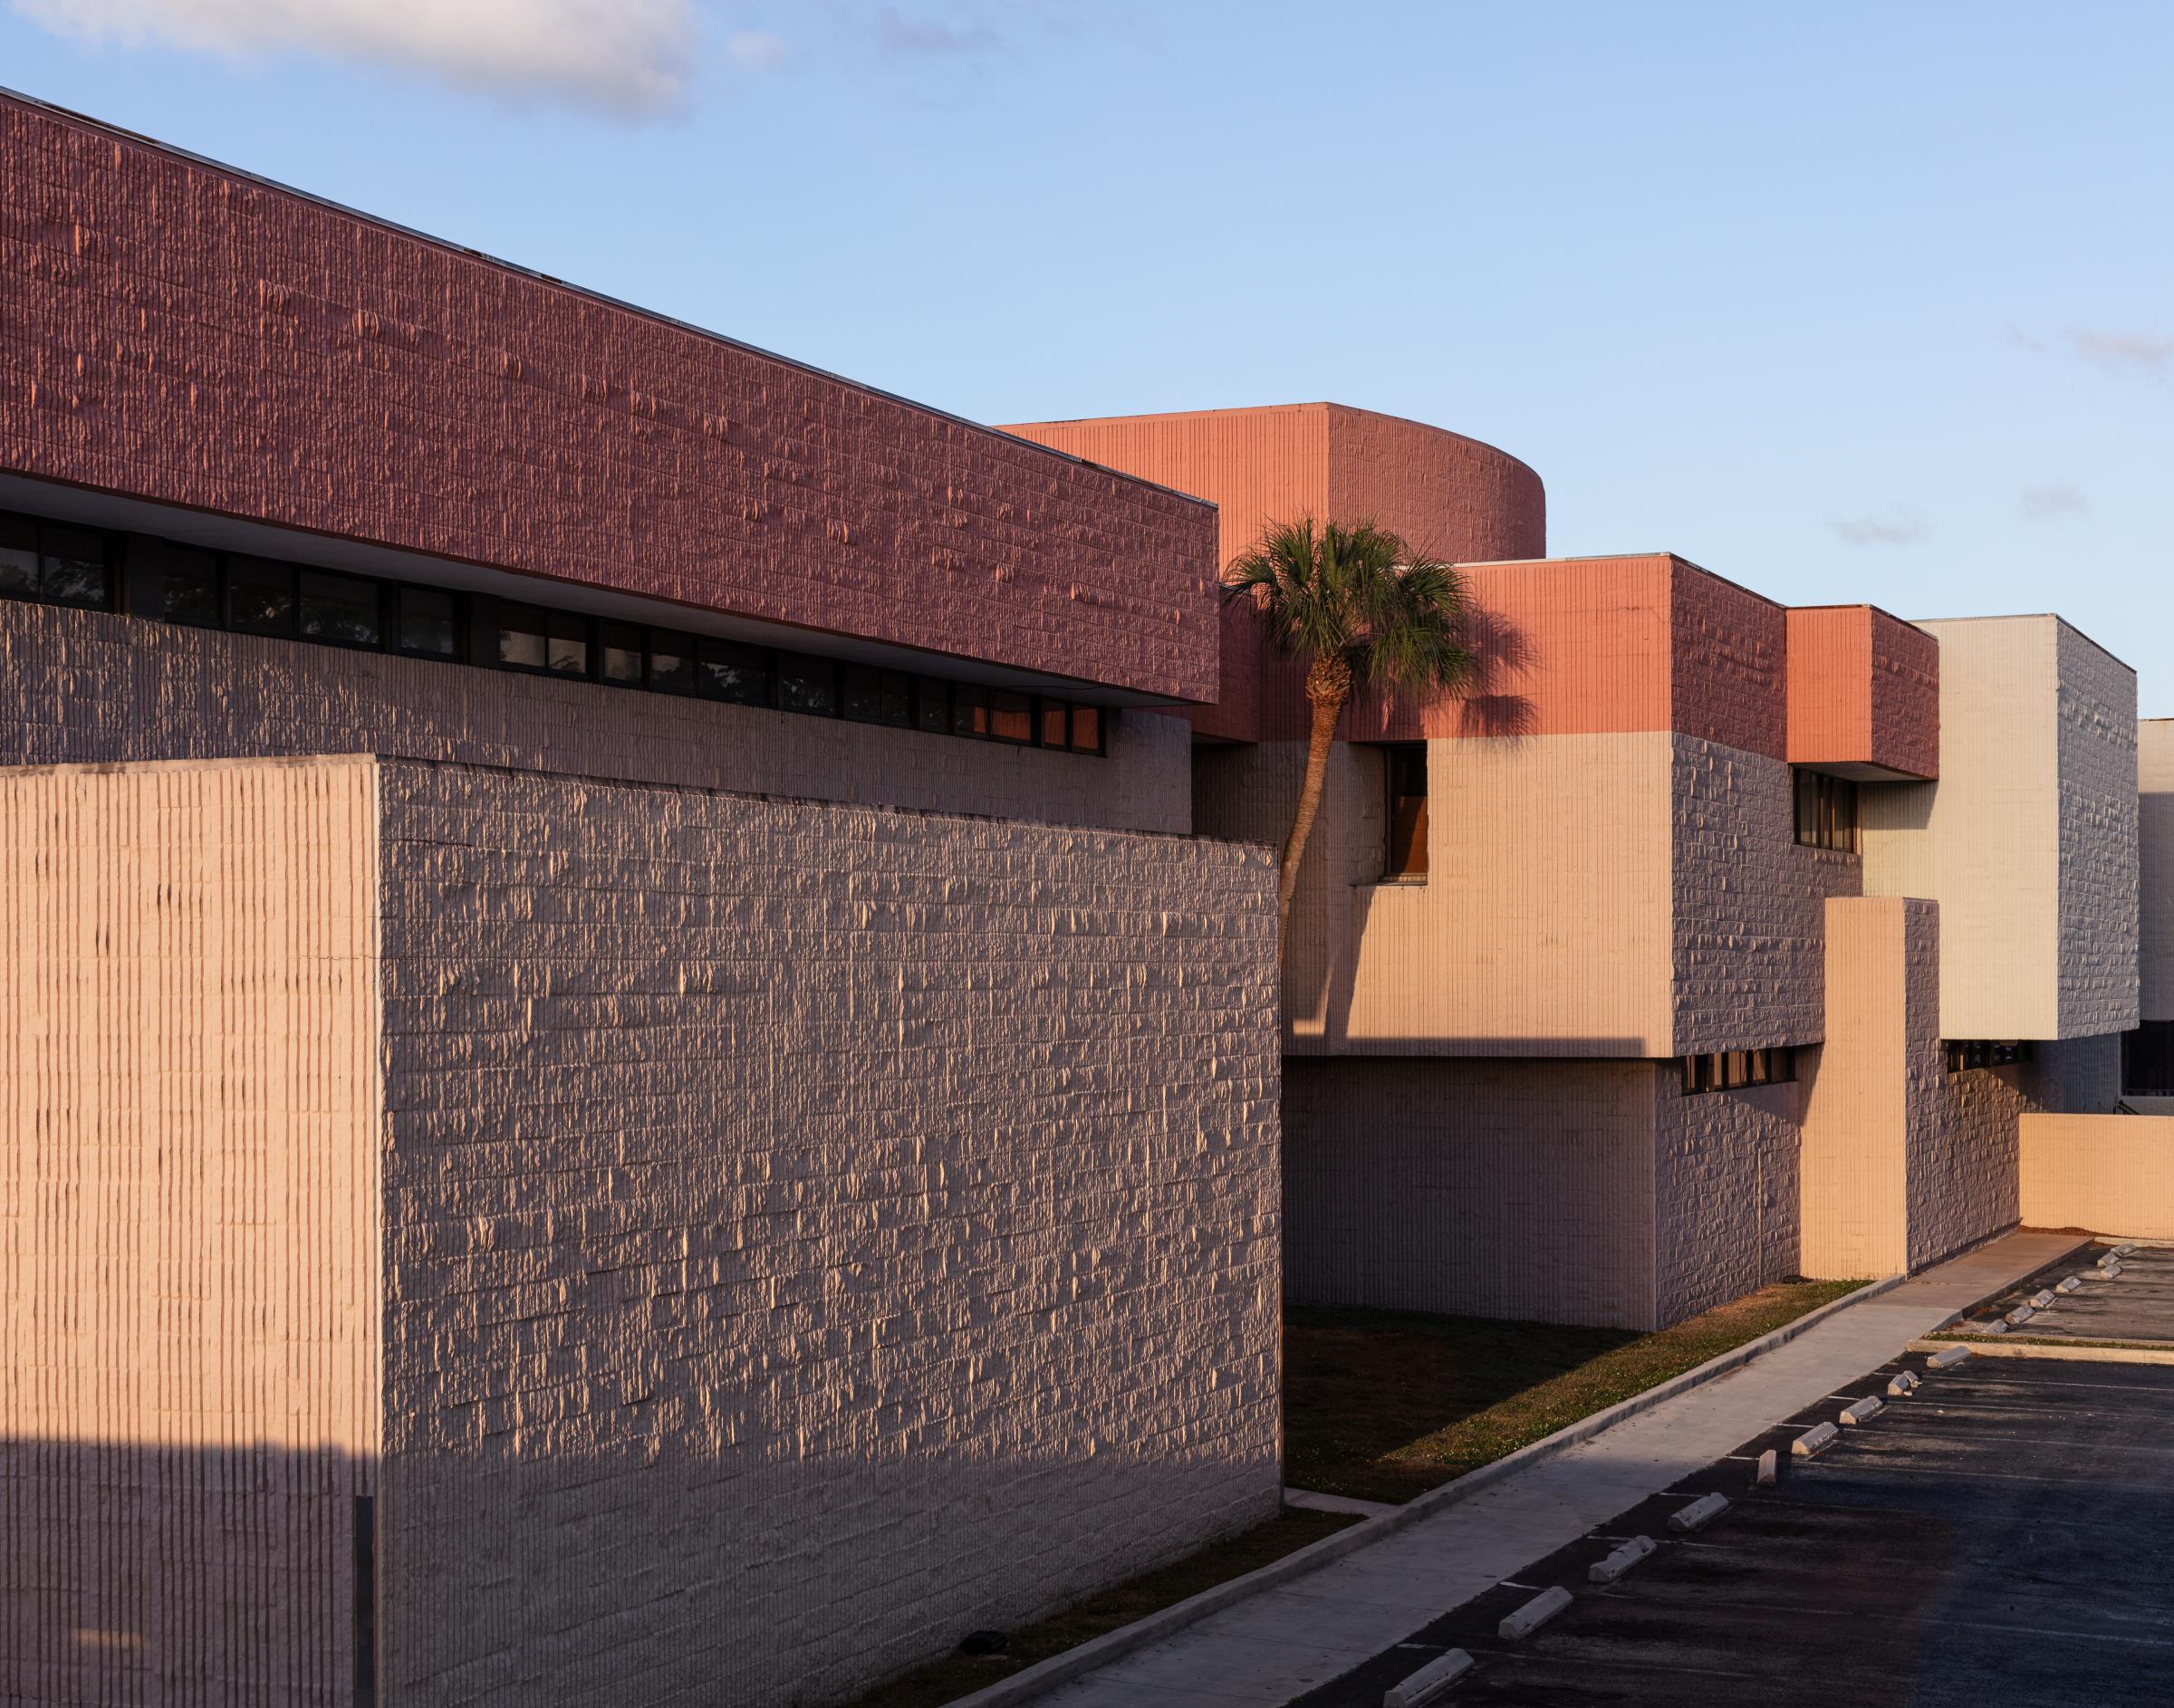 Connecting Concrete: Modernist Architecture from Havana to Miami - Broward County Southern Regional Courthouse, 1977